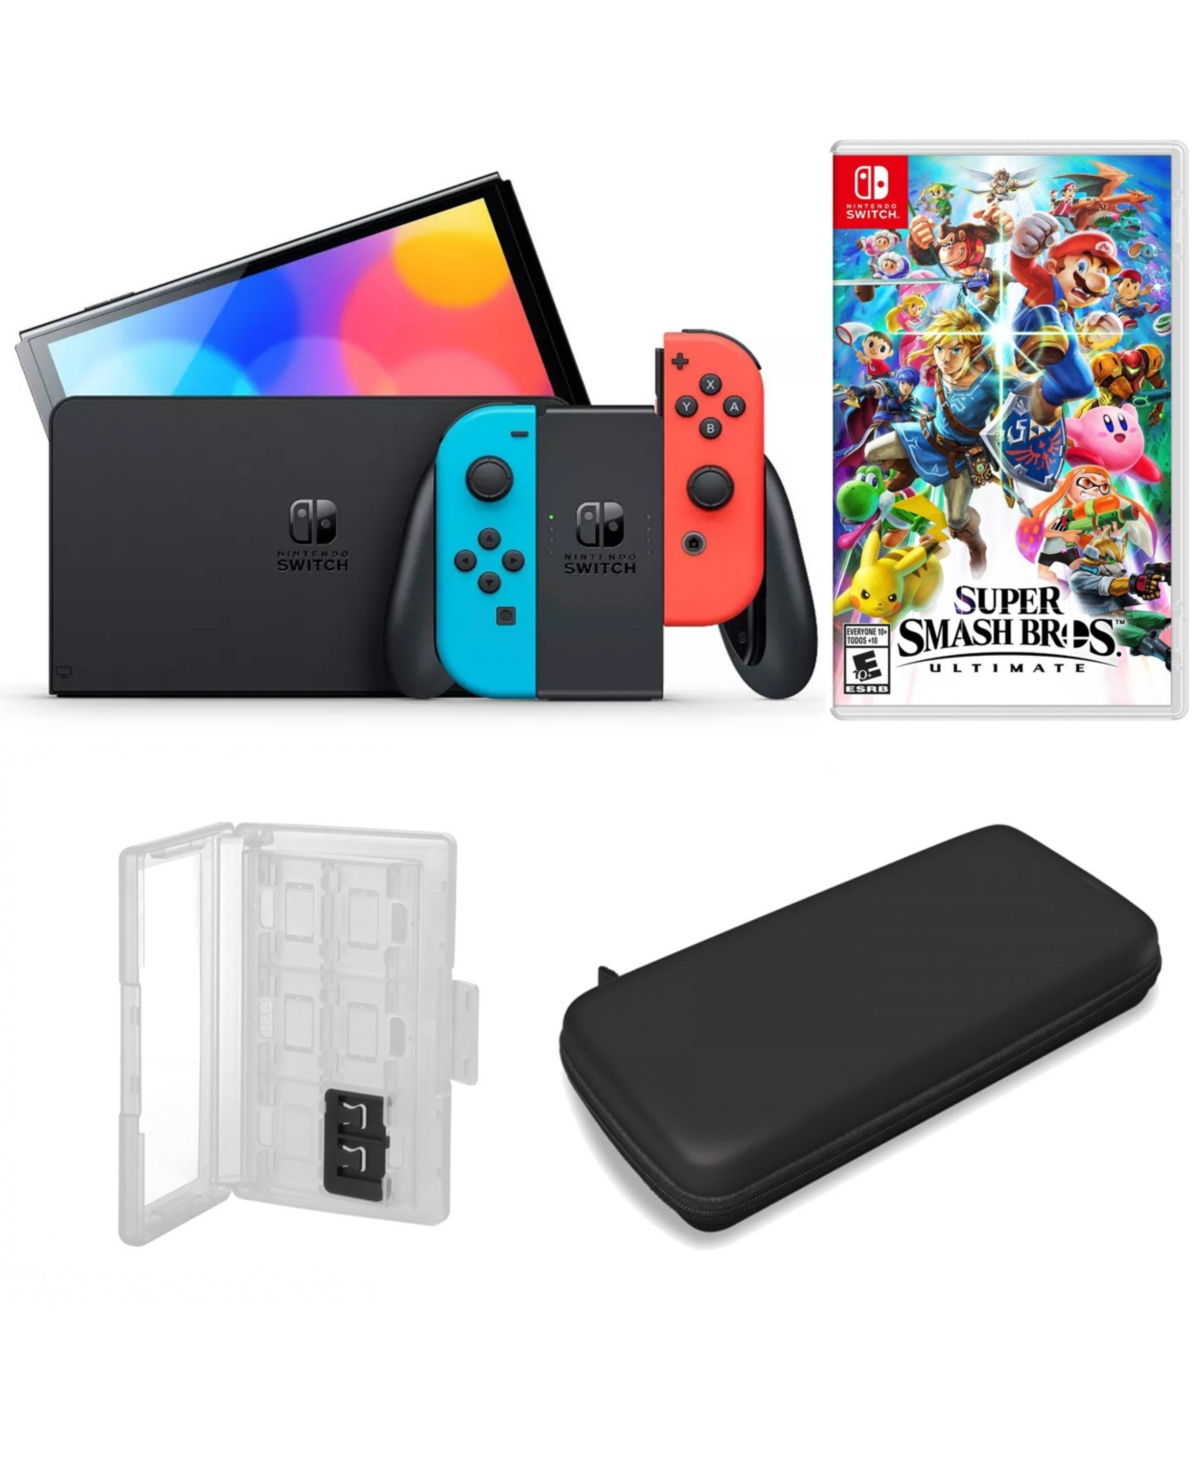 UPC 658580285944 product image for Nintendo Switch Oled in Neon with Super Smash Bros 3 & Accessories | upcitemdb.com